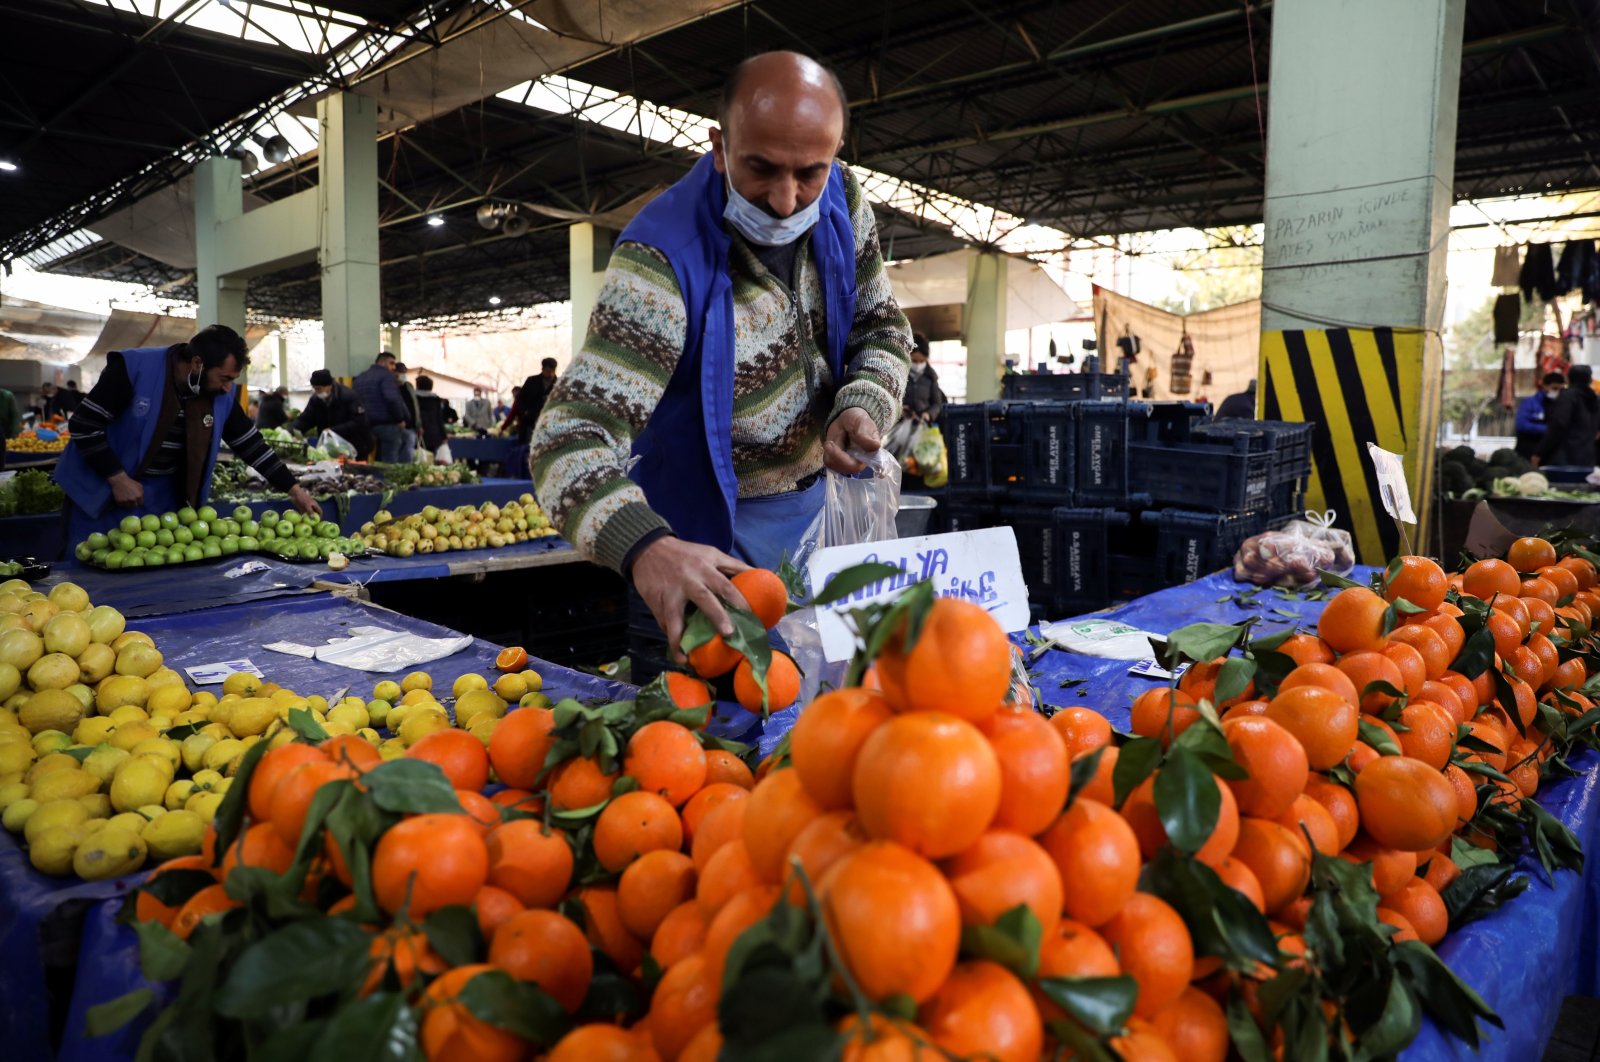 A vendor wearing a protective mask arranges fruit on his stall at a local market, amid the coronavirus disease (COVID-19) outbreak in Ankara, Feb. 24, 2021. (Reuters Photo)